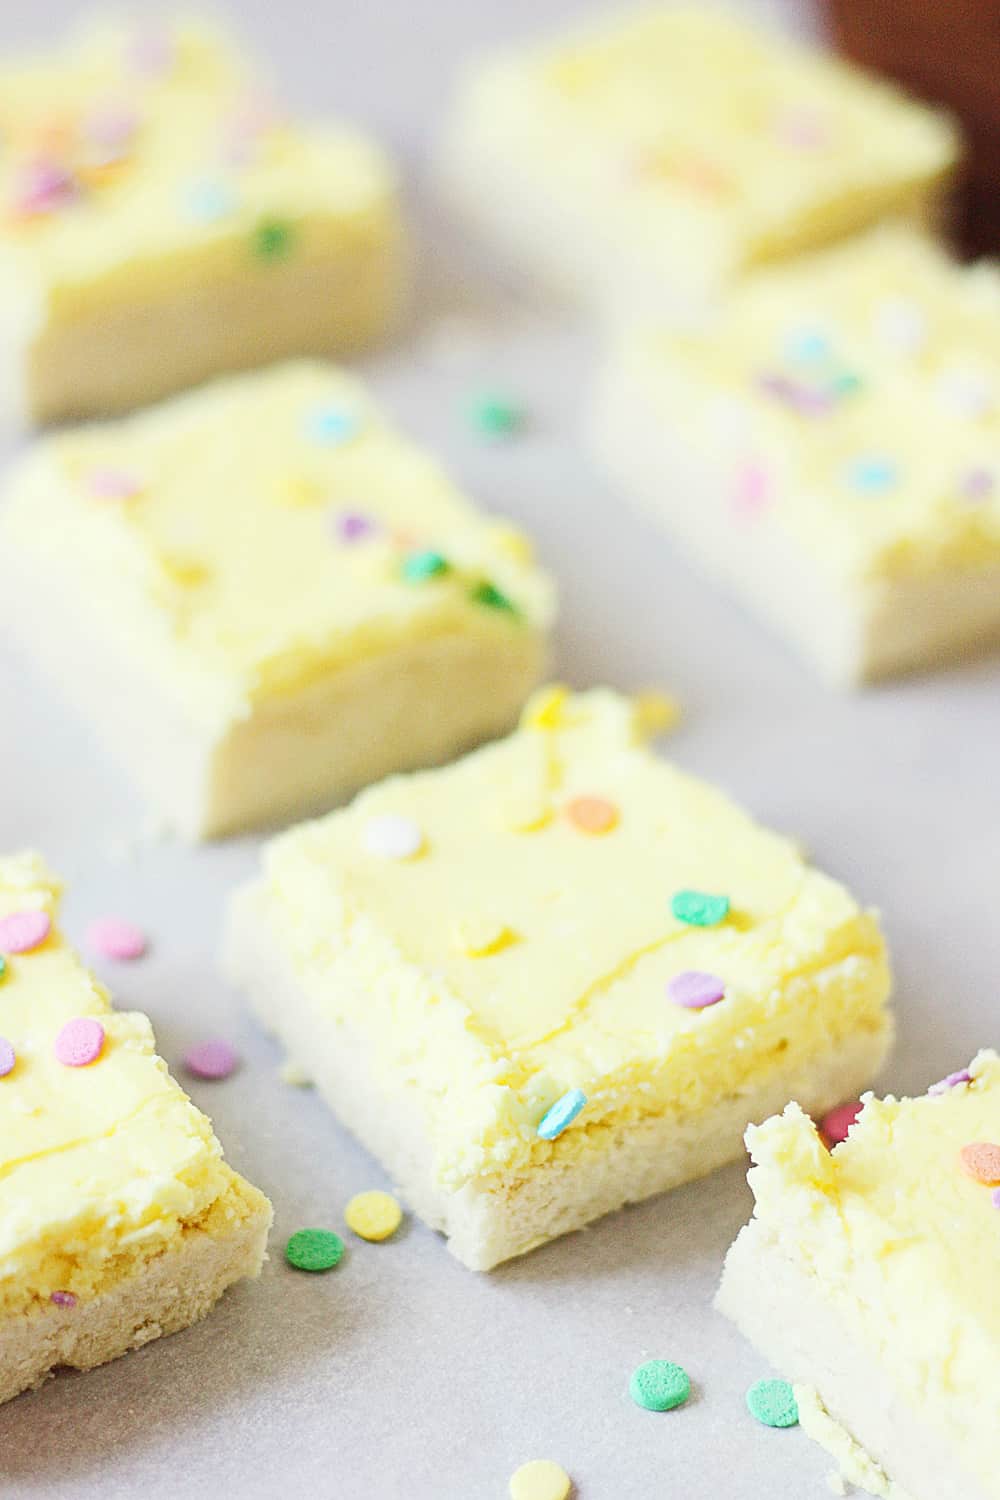 Sugar Cookie Bars - Sugar cookie bars are great for serving a crowd. They're soft and chewy and the frosting is to die for! Plus, they're quicker to make than their individually-portioned sugar cookie counterparts. | halfscratched.com